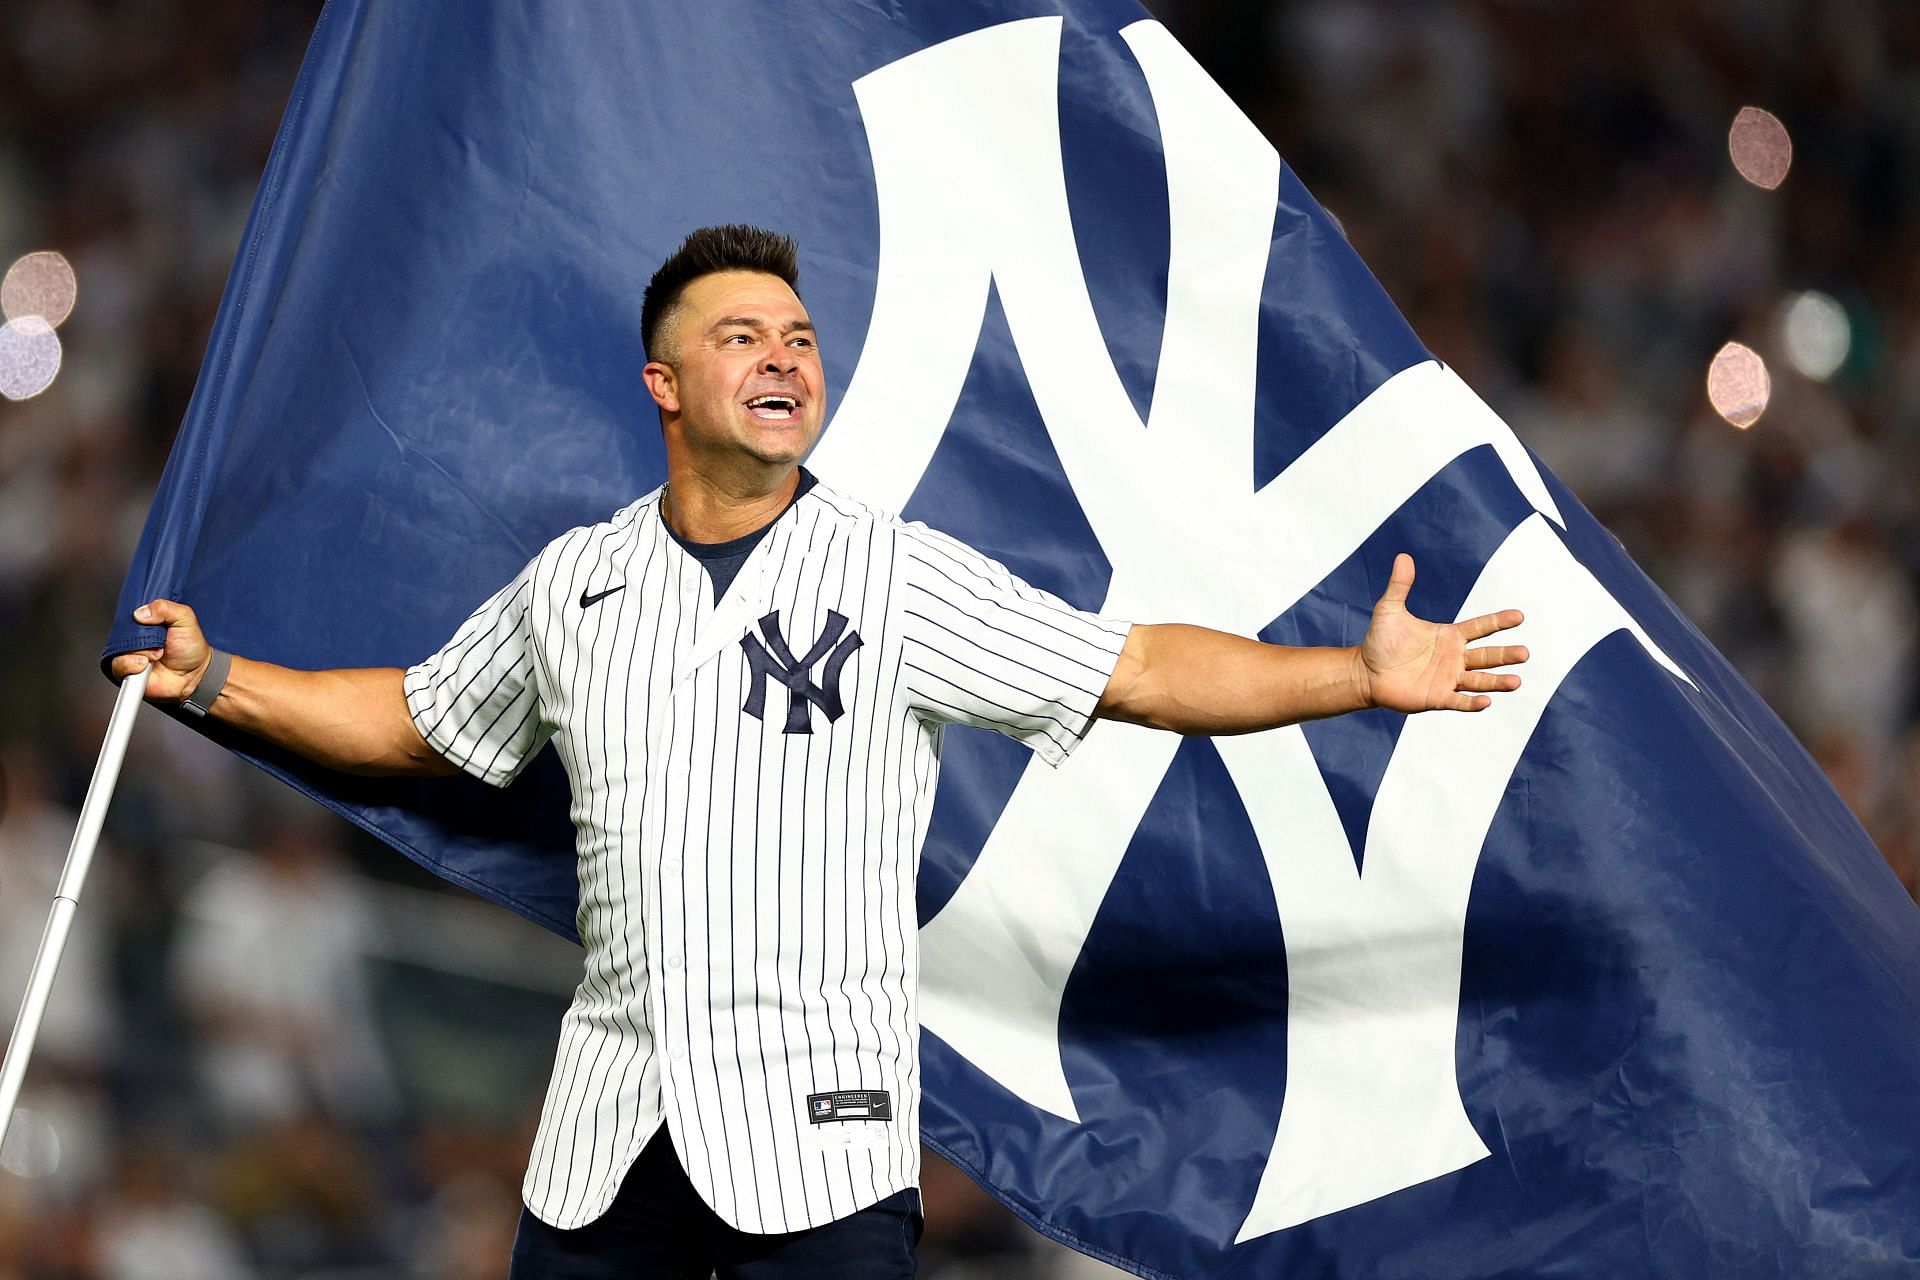 Former New York Yankees Nick runs on the field with a Yankees Flag prior to game one of the American League Division Series against the Cleveland Guardians at Yankee Stadium on October 11, 2022, in New York, New York. (Photo by Elsa/Getty Images)